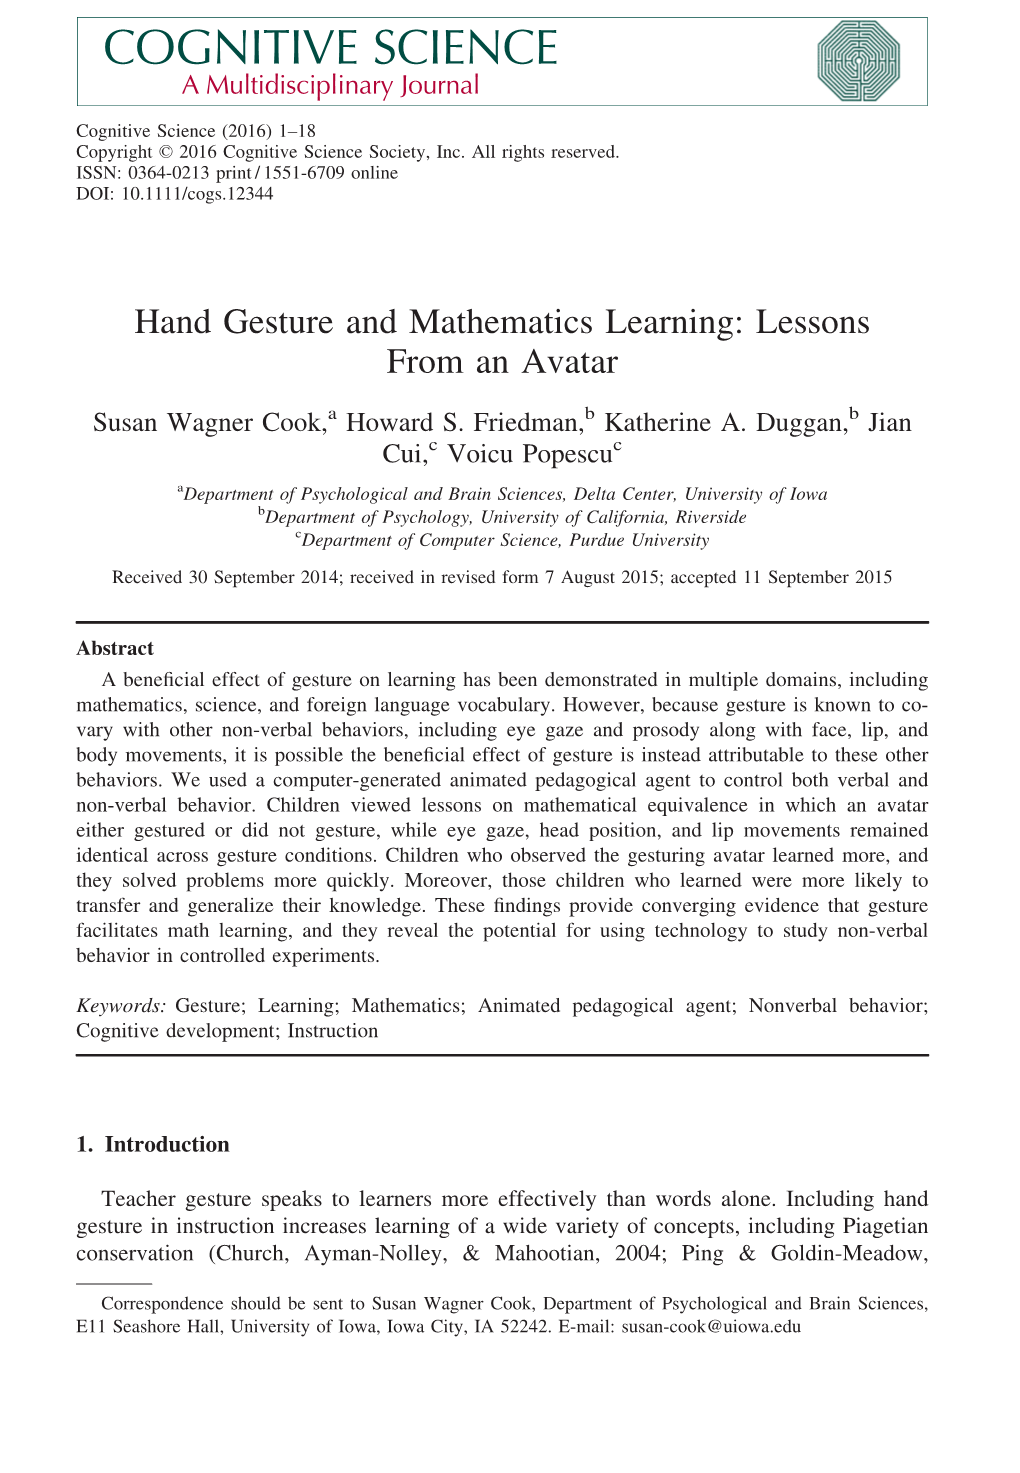 Hand Gesture and Mathematics Learning: Lessons from an Avatar